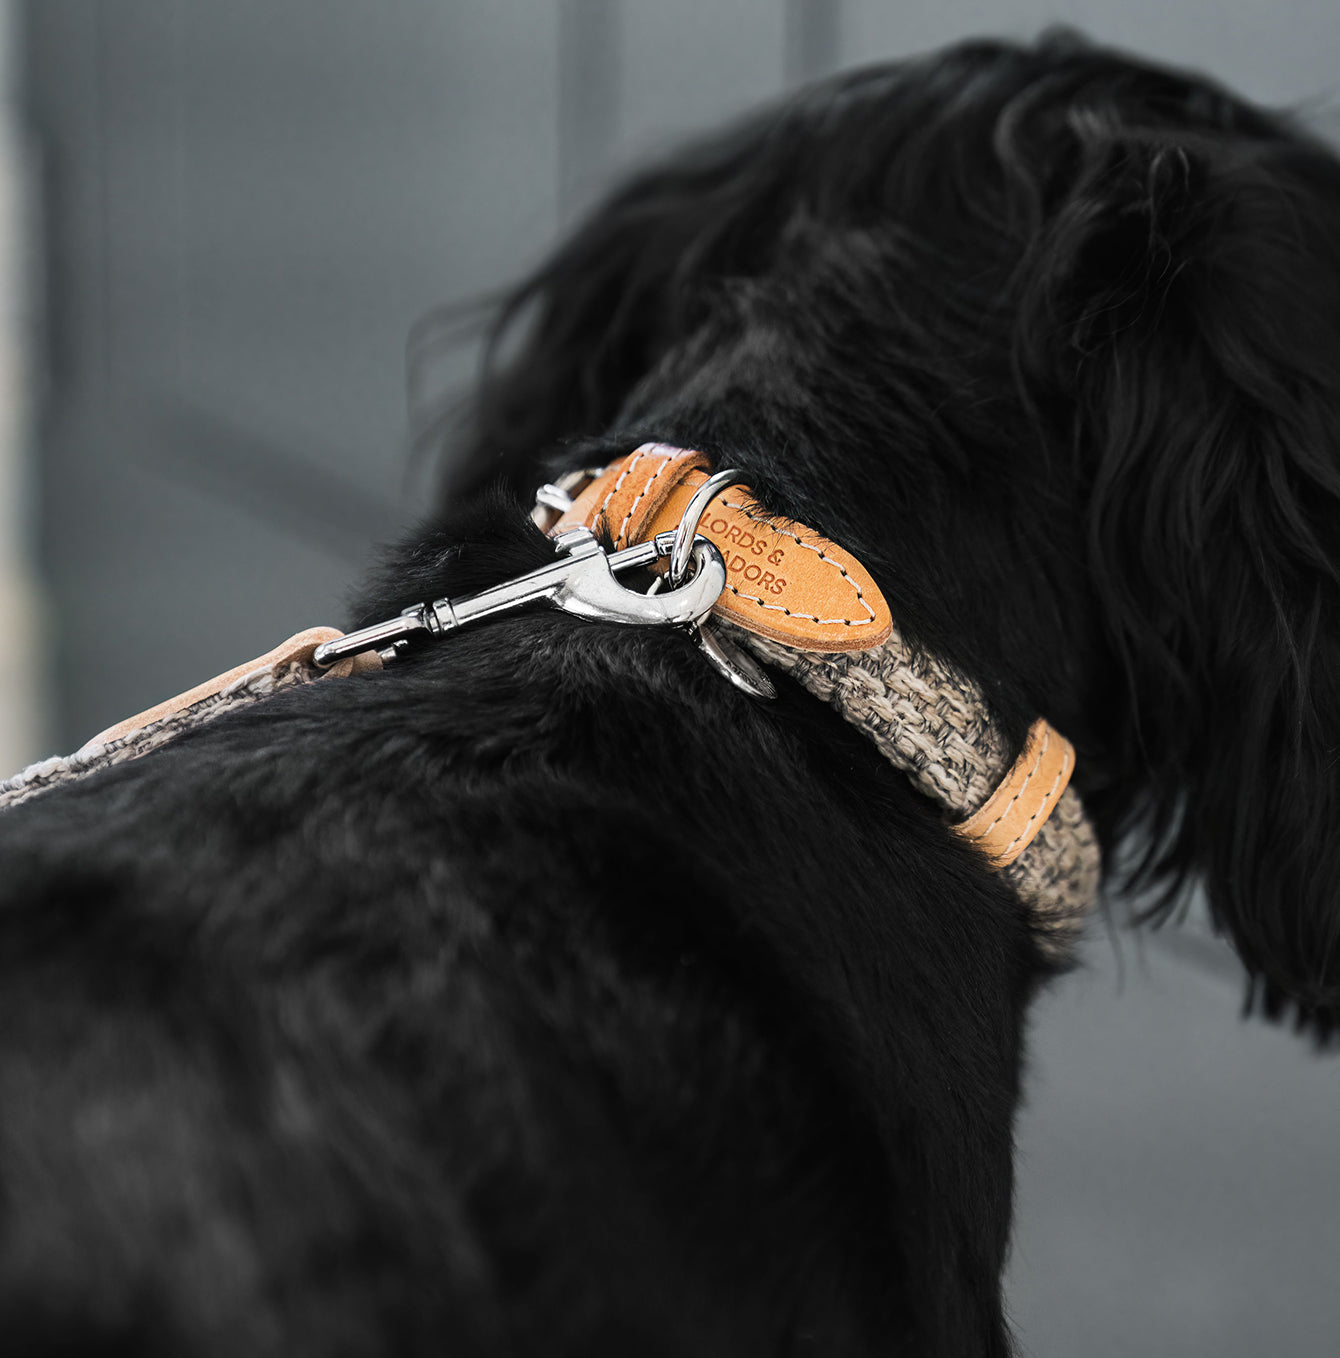 Discover dog walking luxury with our handcrafted Italian Herdwick dog leash in beautiful pebble with woven light grey fabric! The perfect leash for dogs available now at Lords & Labradors US